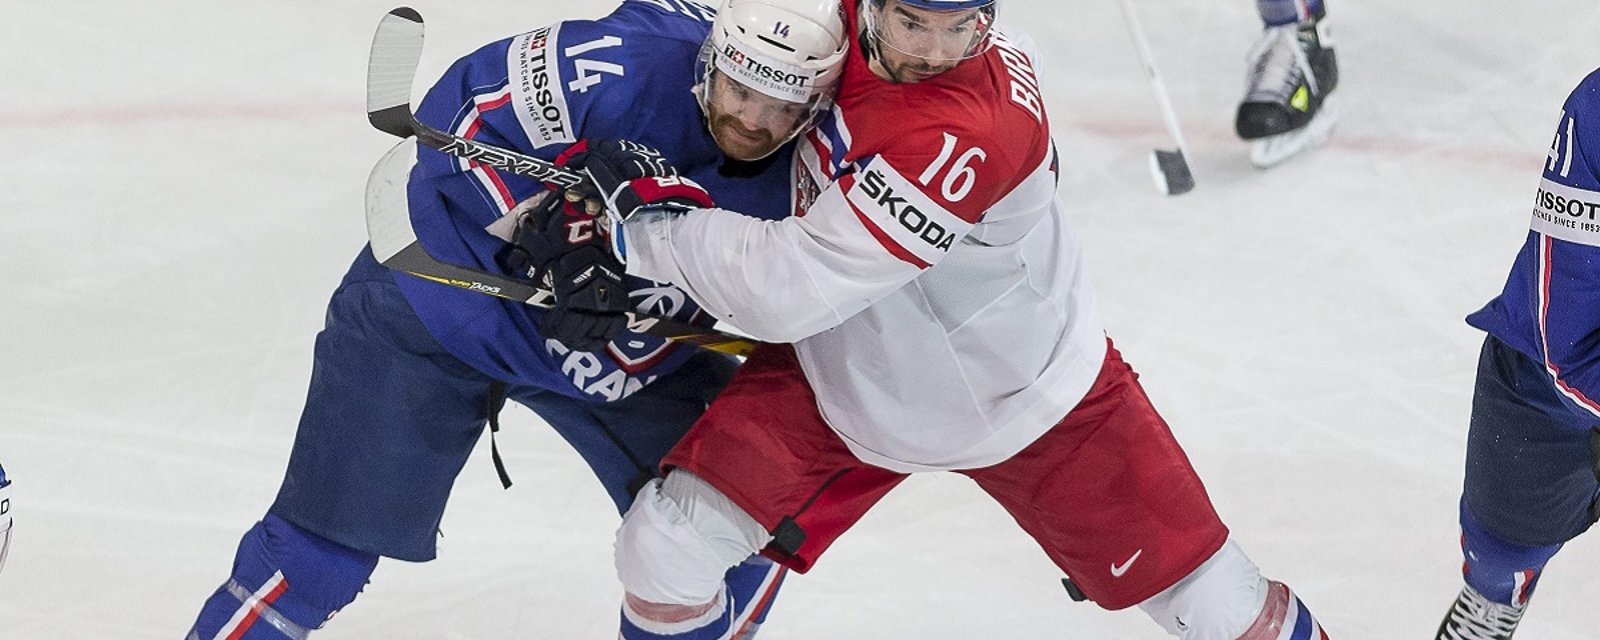 Rumor: Former NHLer has door open for a comeback after 3 years in the KHL.